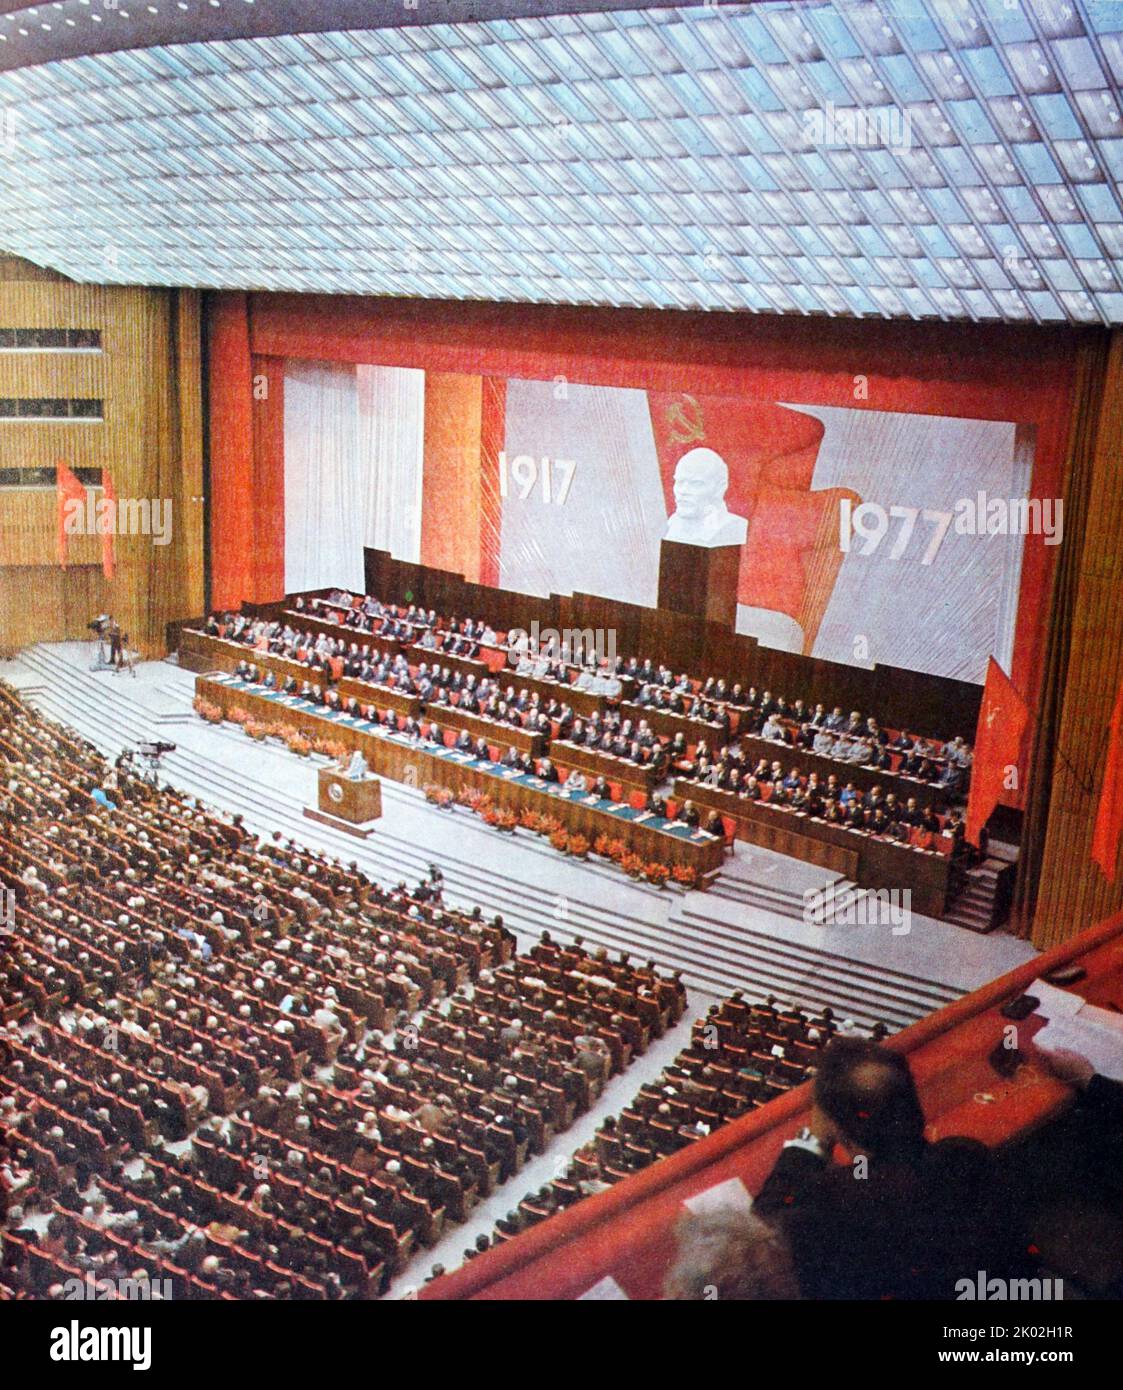 Kremlin Palace of Congresses. November 2, 1977. The ceremonial meeting of the Central Committee of the CPSU, the Supreme Council of the USSR and the Supreme Council of the RSFSR, dedicated to the 60th anniversary of the Great October Socialist Revolution.&#13;&#10; Stock Photo